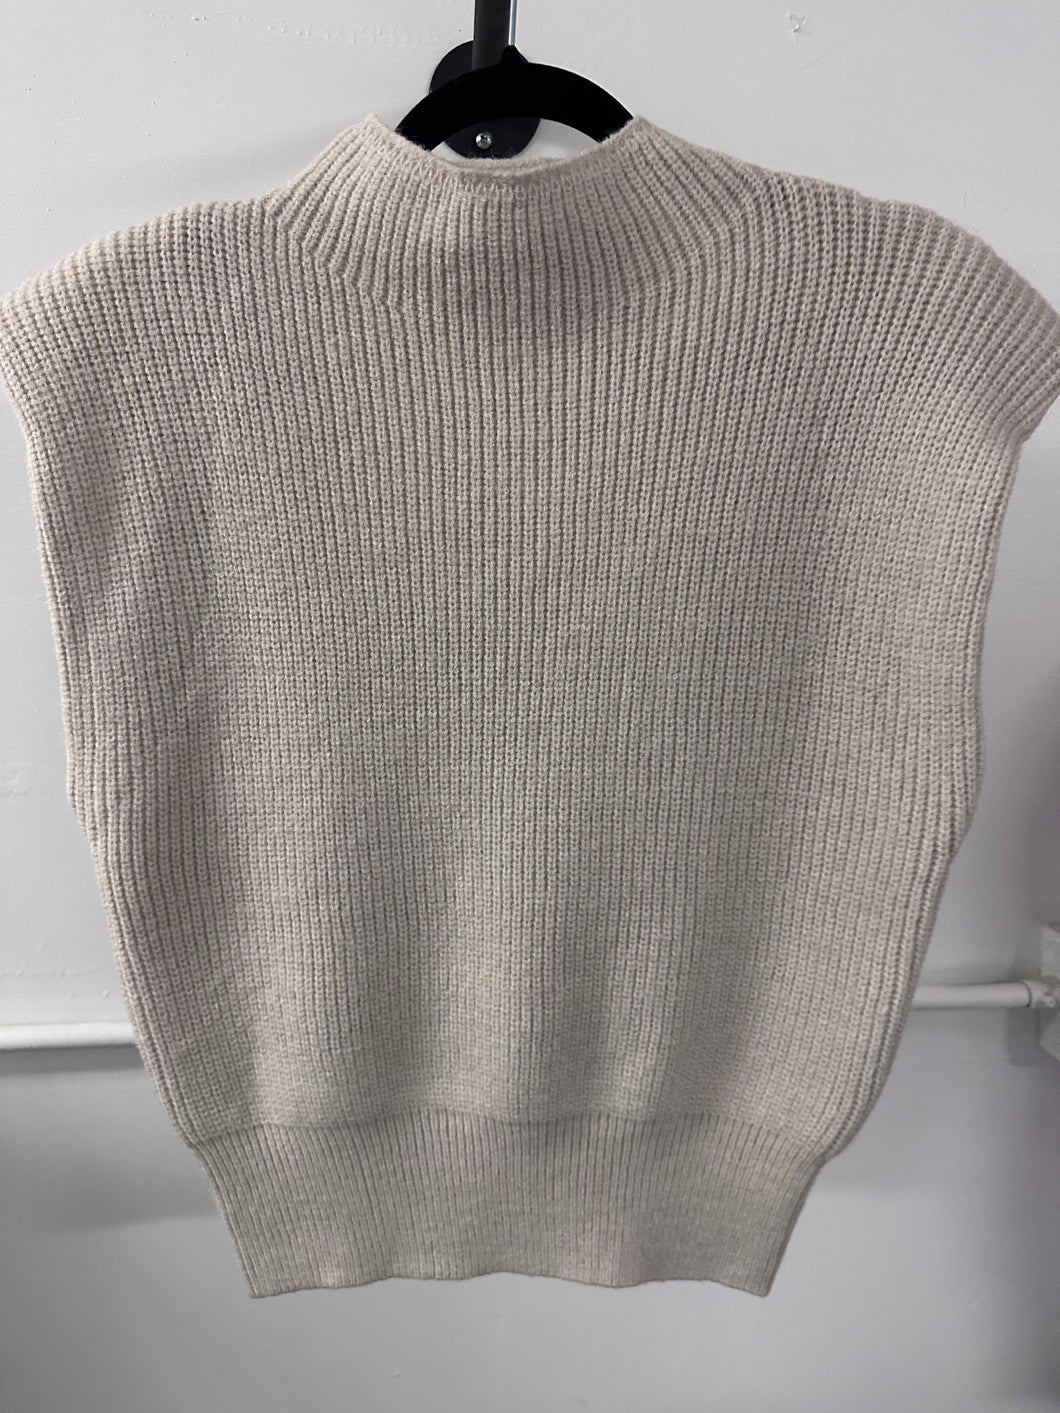 Not Happening Sweater Top- Oatmeal